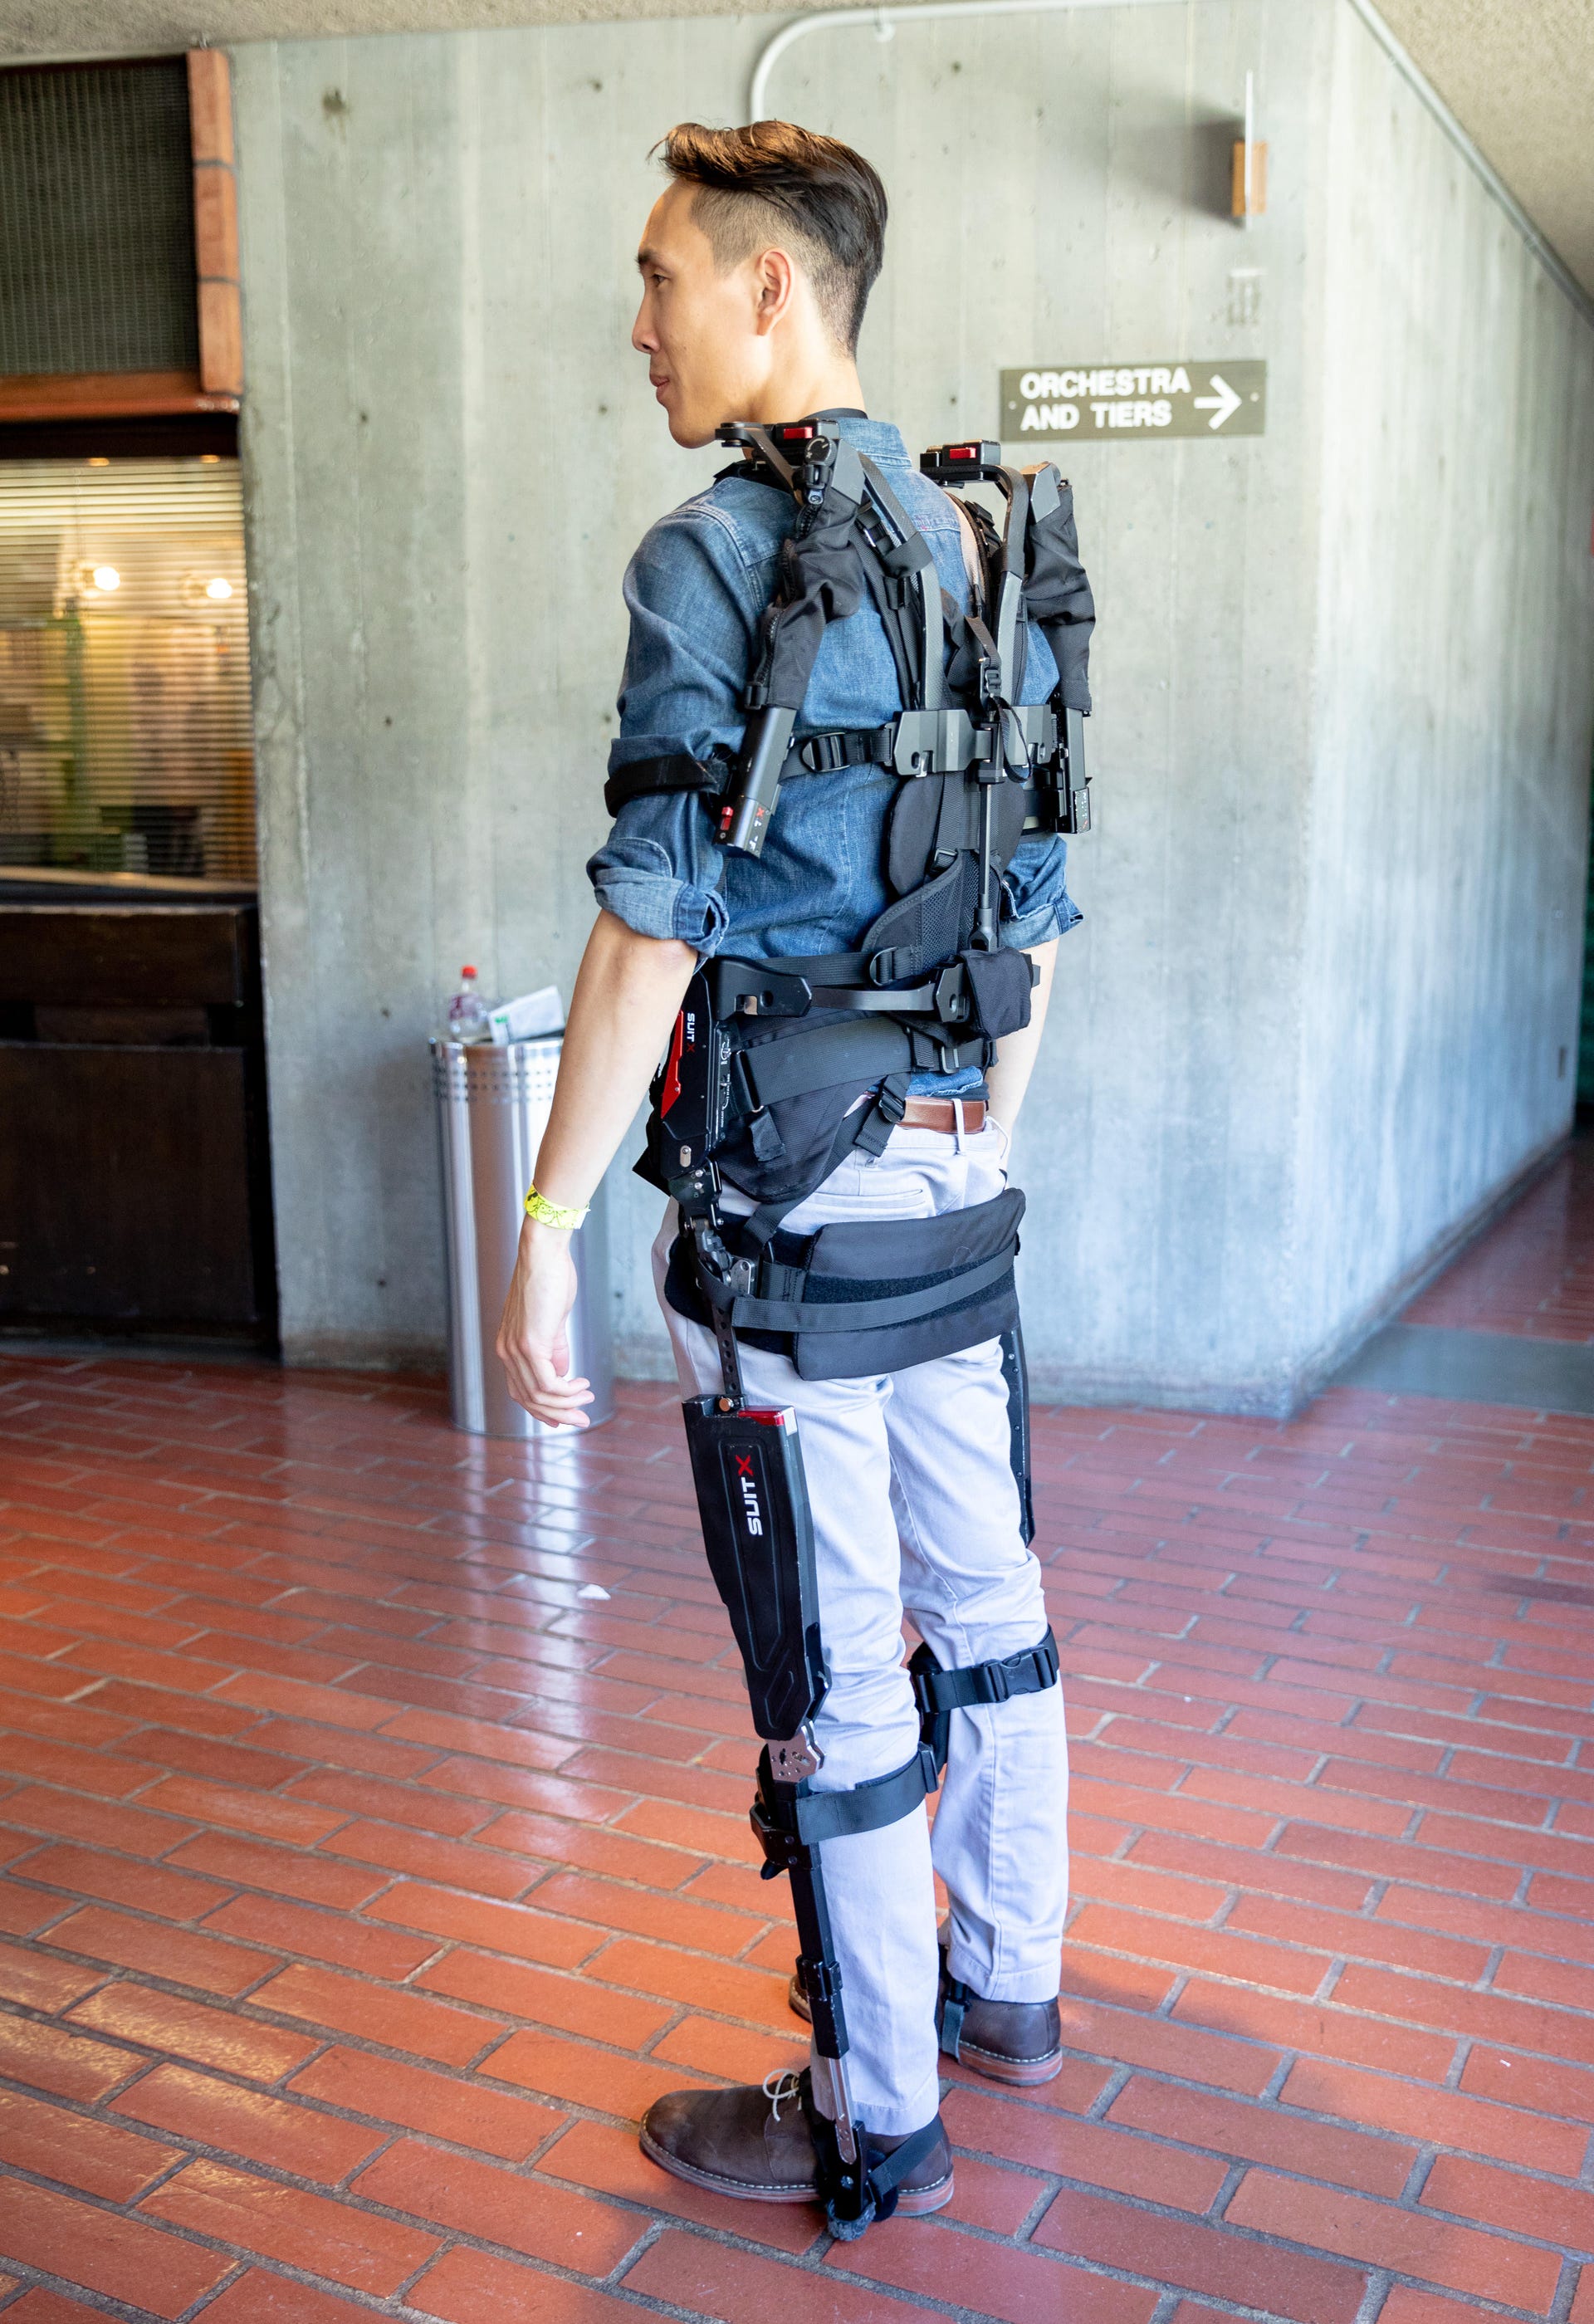 Nathan Poon, a UC Berkeley graduate student and developer of the BackX module of the SuitX strength-augmentation suit